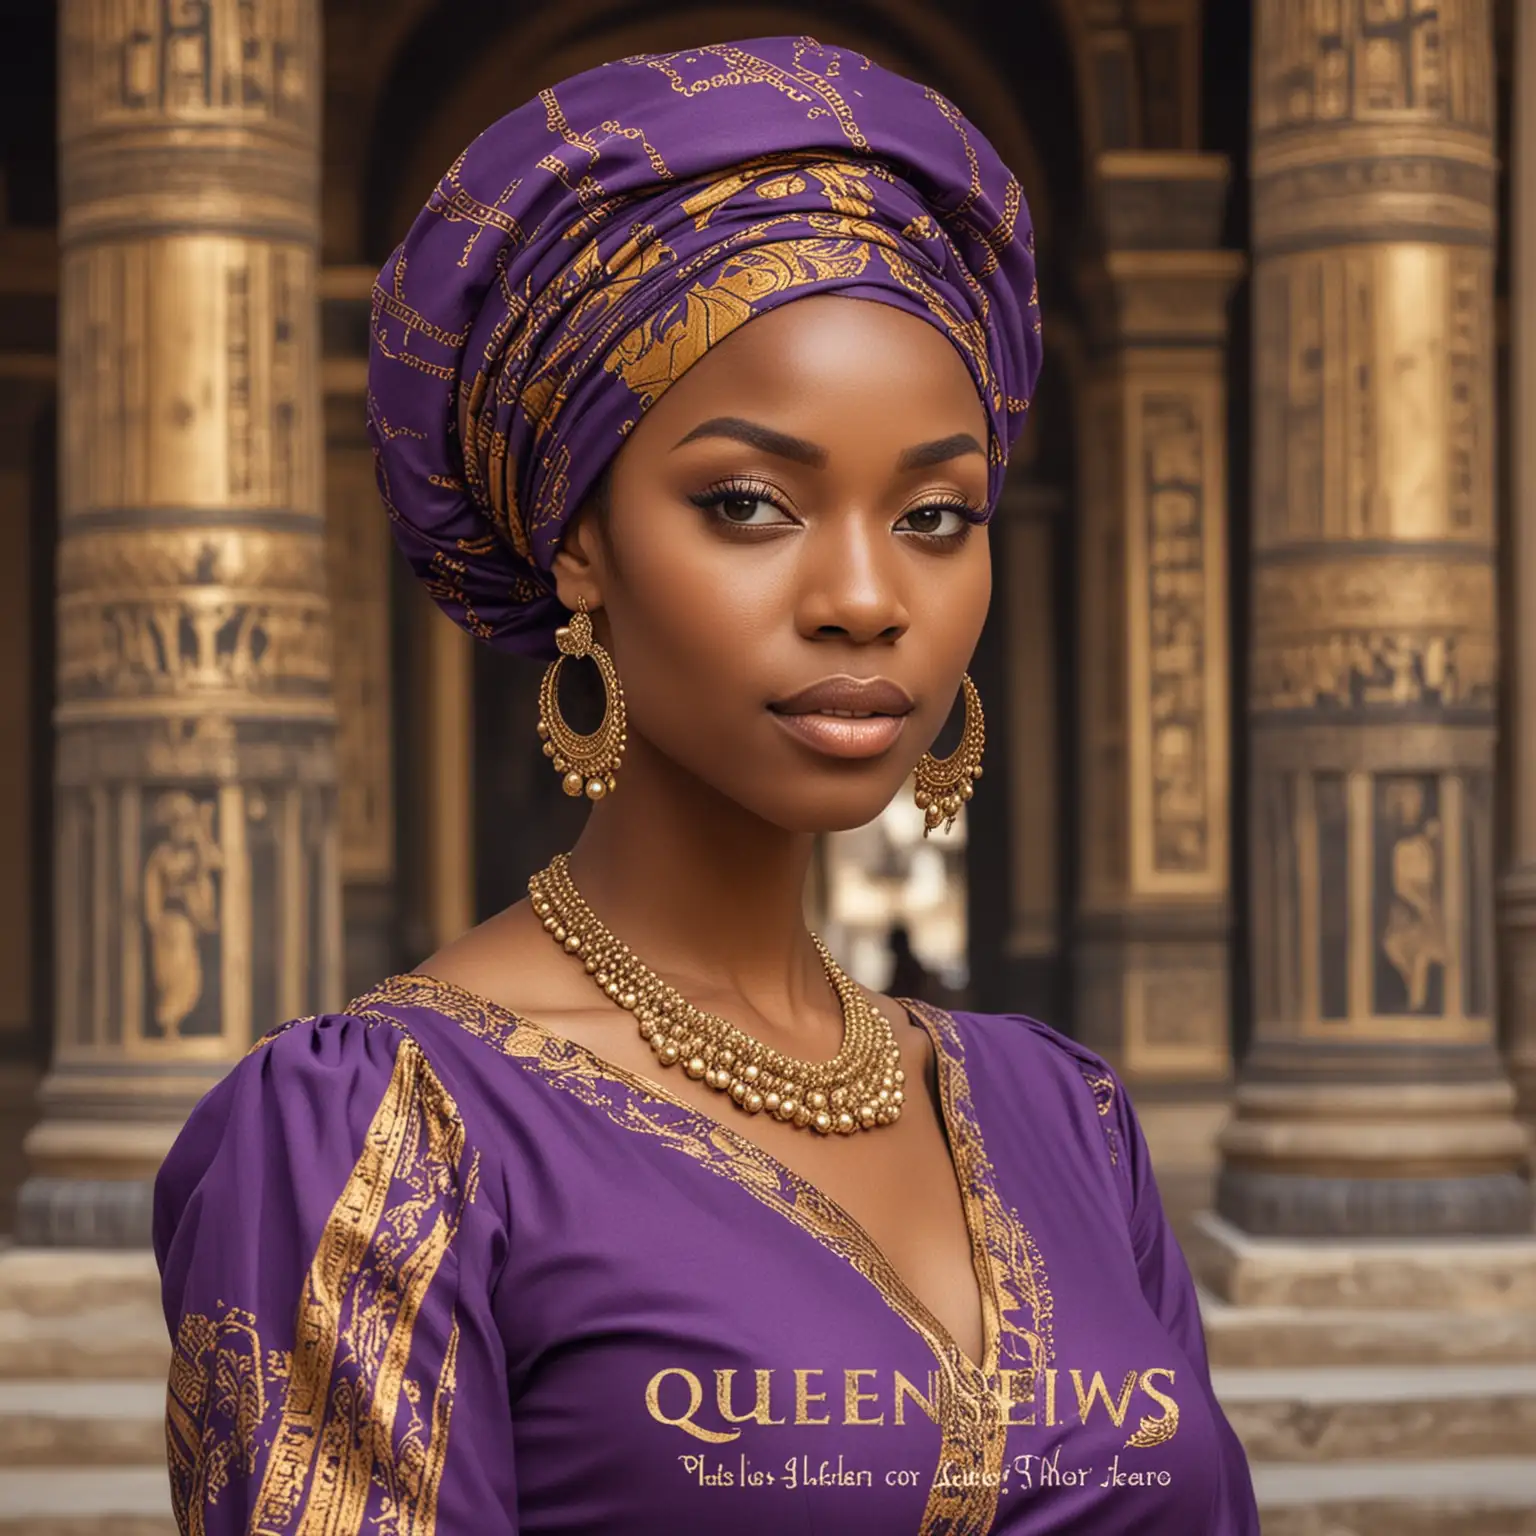 Beautiful, kind black woman in a modest purple and gold dress, wearing a head wrap. She's in front of a temple and above her says "Queen Esther" in black font